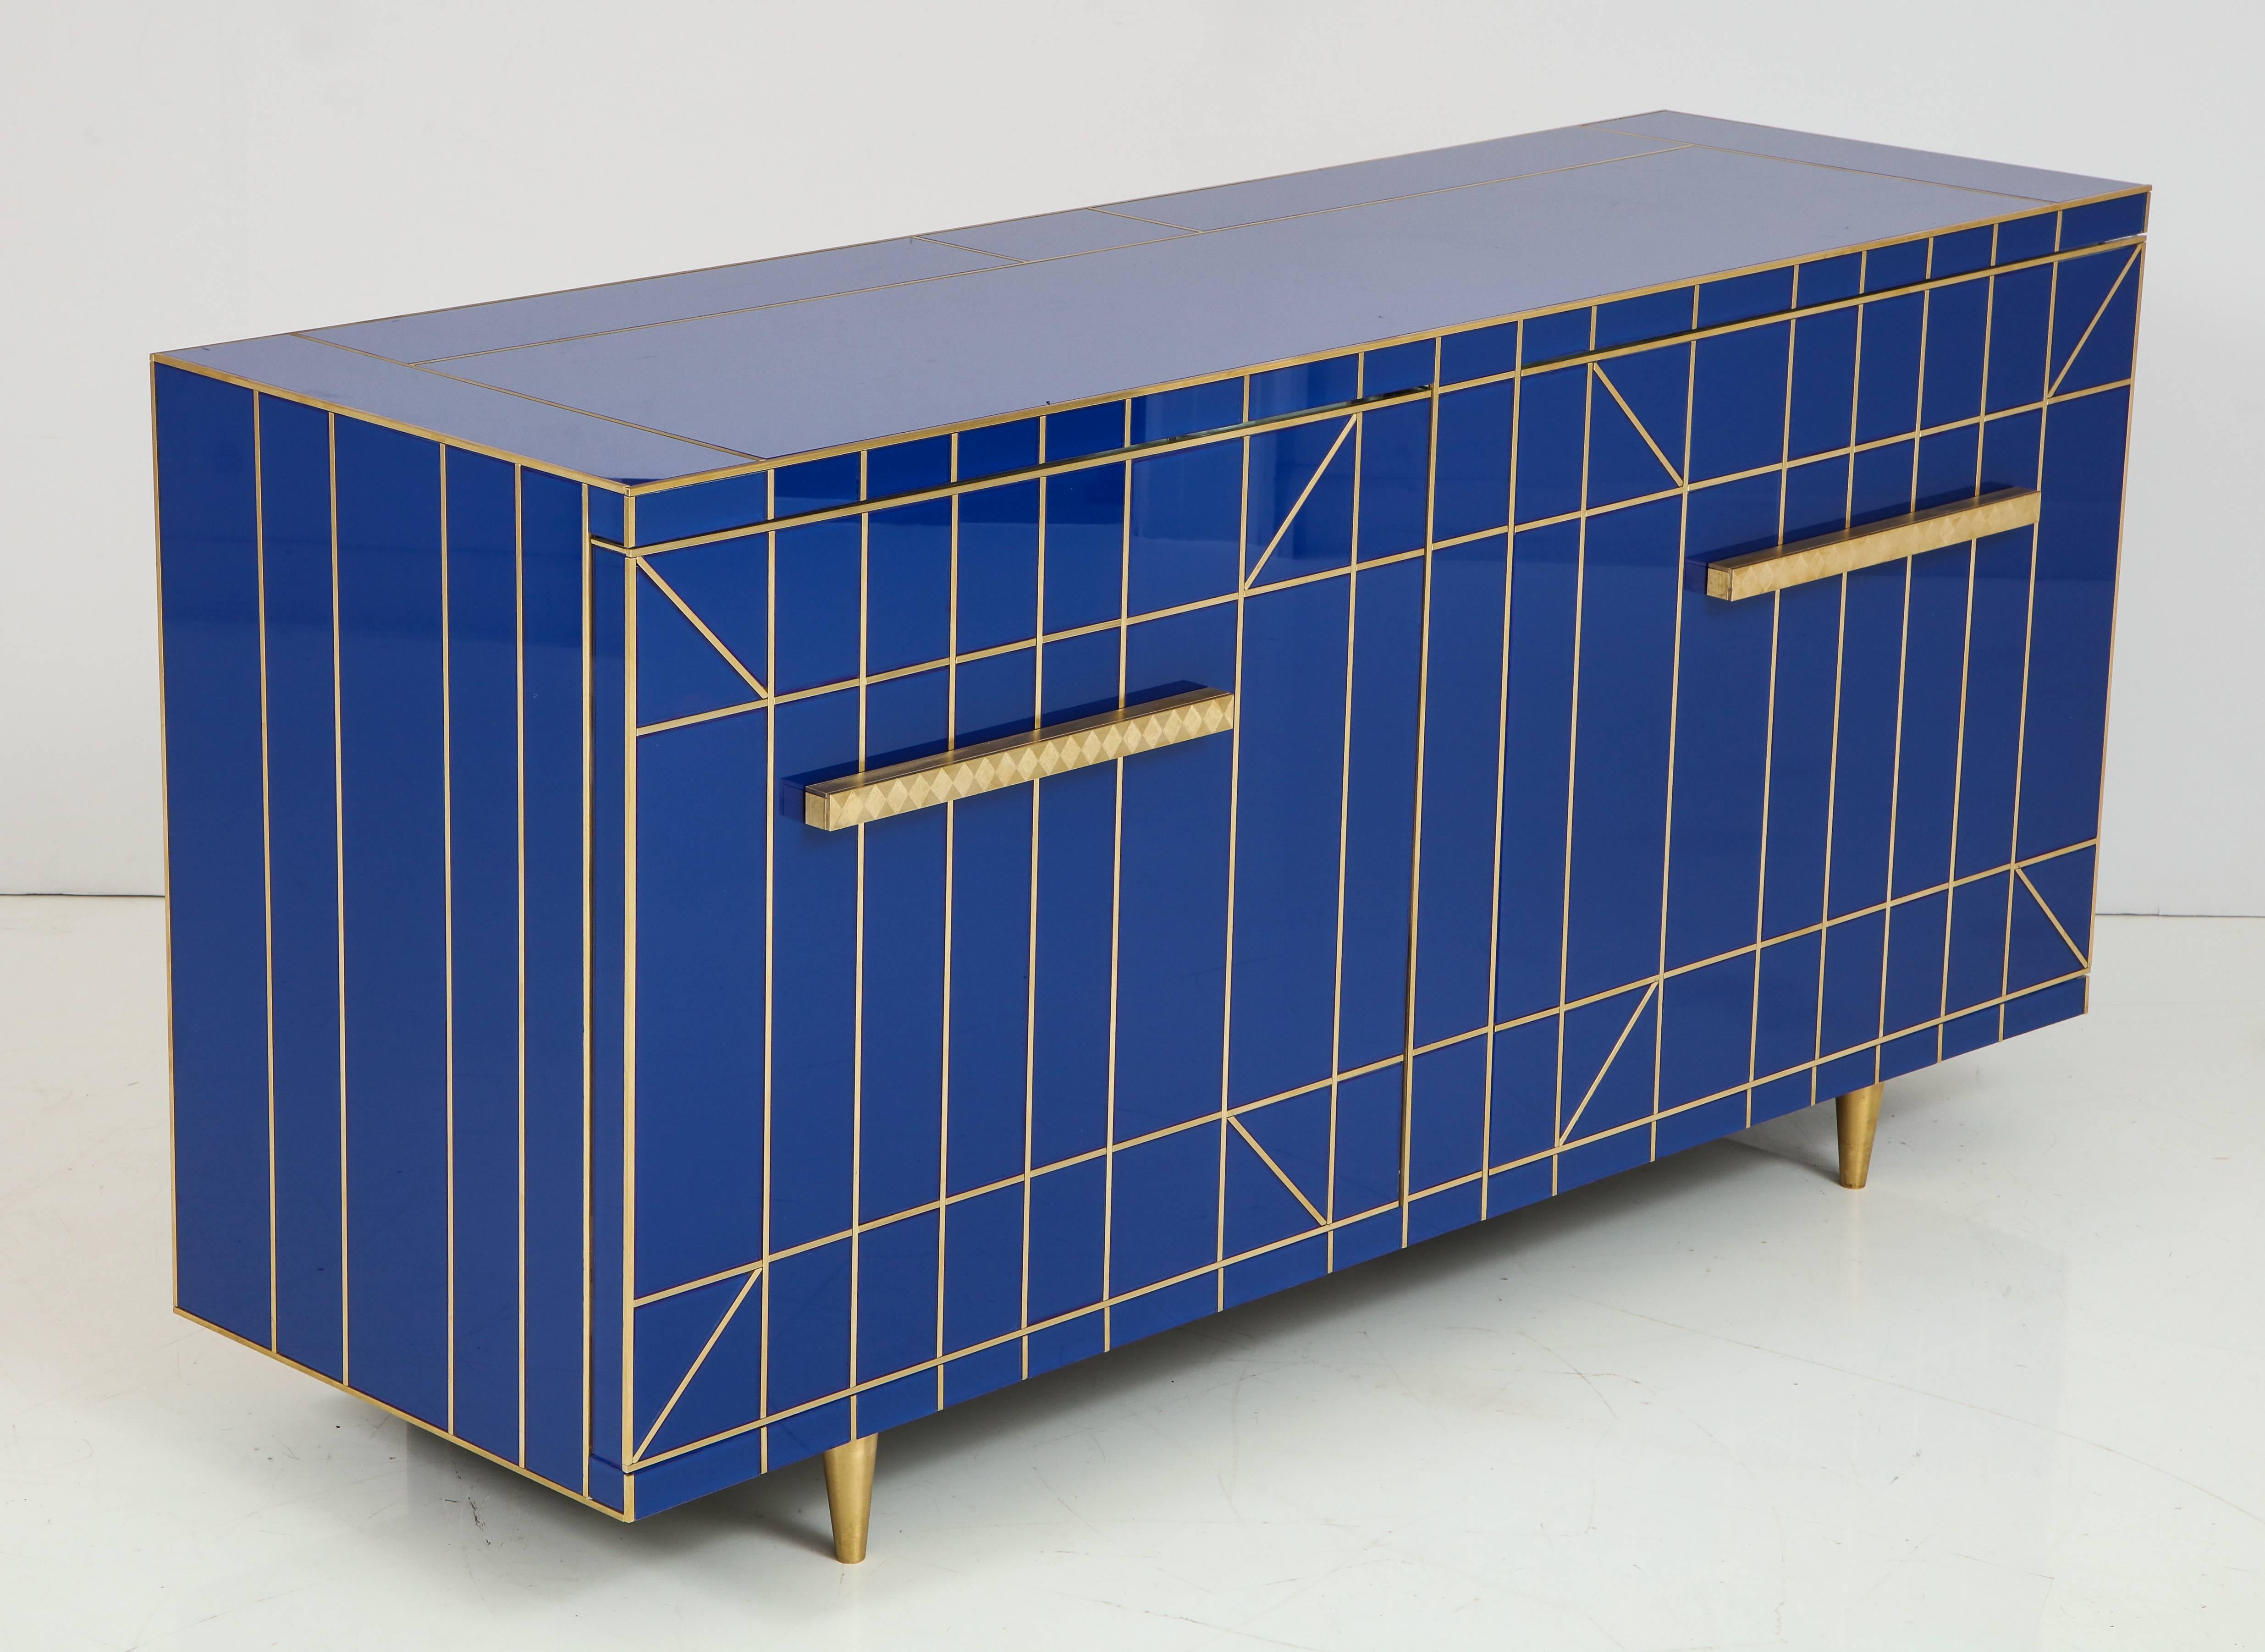 Elegant and timeless cobalt blue glass sideboard or credenza with tapered brass legs and brass inlays. Interior is lined in mirror. Two doors open to reveal a large storage area separated by a smaller top level shelf that is clad in mirror.